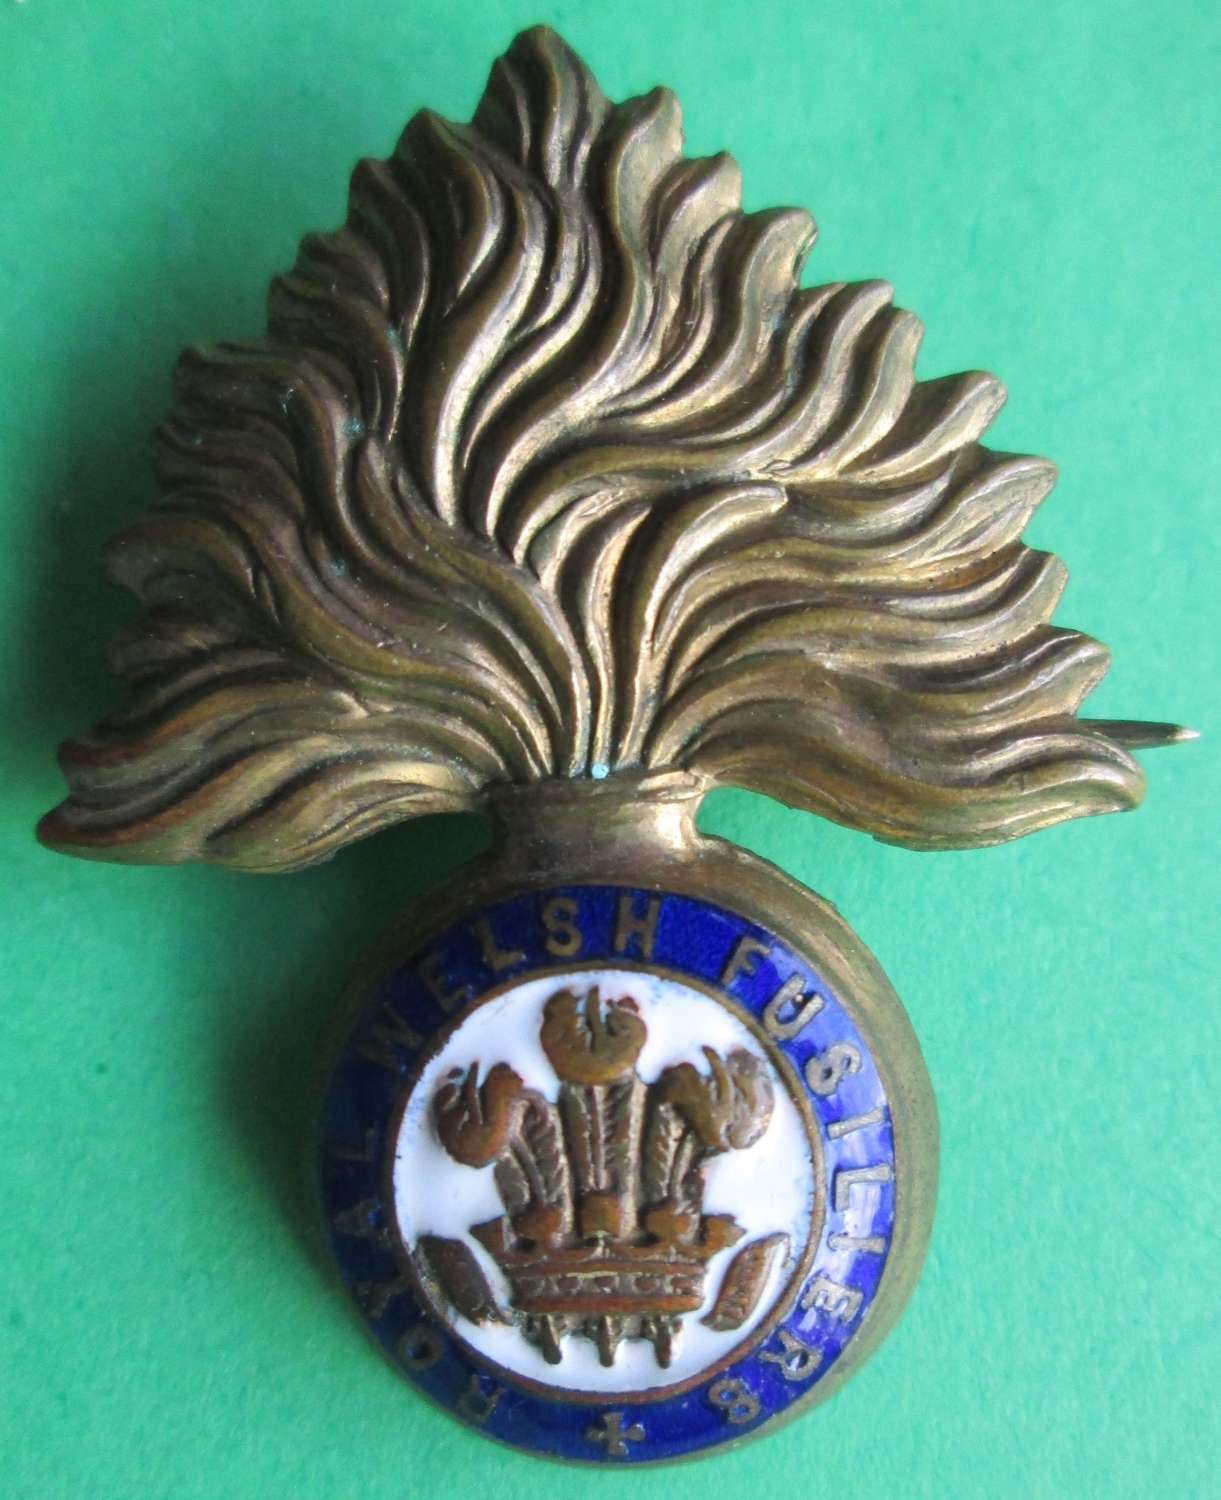 A ROYAL WELSH FUSILIERS SWEETHEART BROOCH